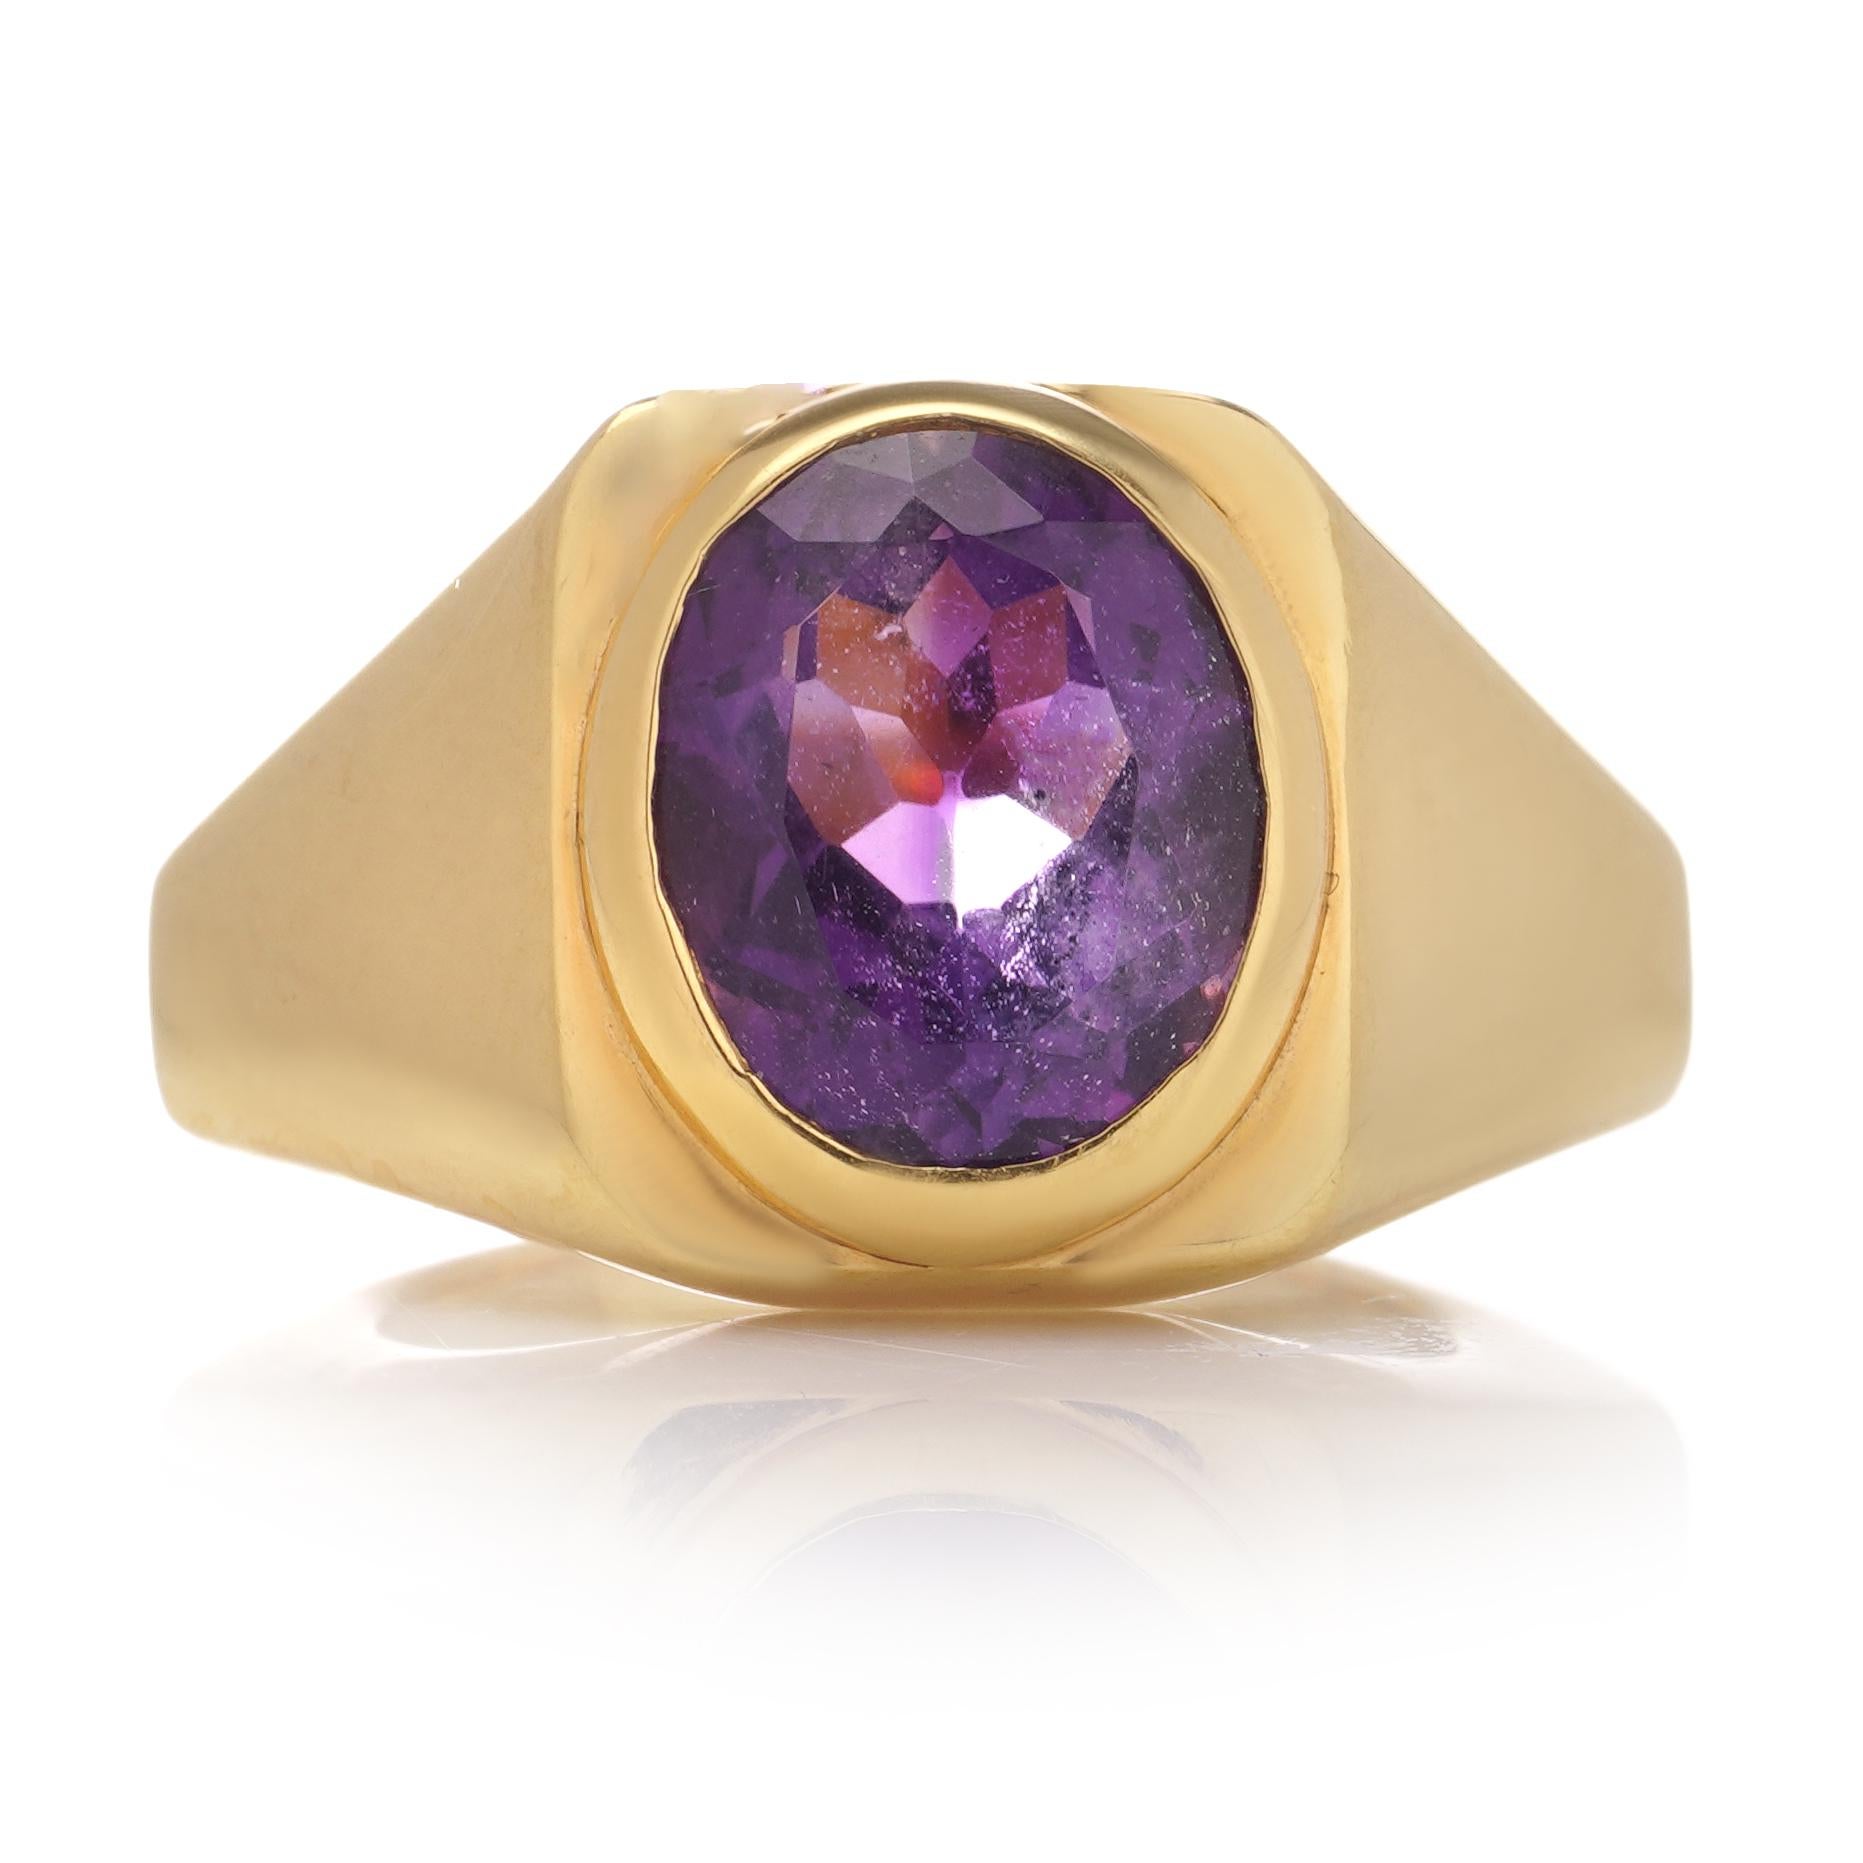 Bvlgari 22kt. yellow gold geometric band ring set with an oval-cut amethyst.
Hallmarked with BVLGARI NY, 22 kt. gold.
Made in the US, New York
Fully hallmarked.

Dimensions -
Finger Size : (UK) = J (US) = 5 (EU) = 50
Length x width x depth: 2.2 x